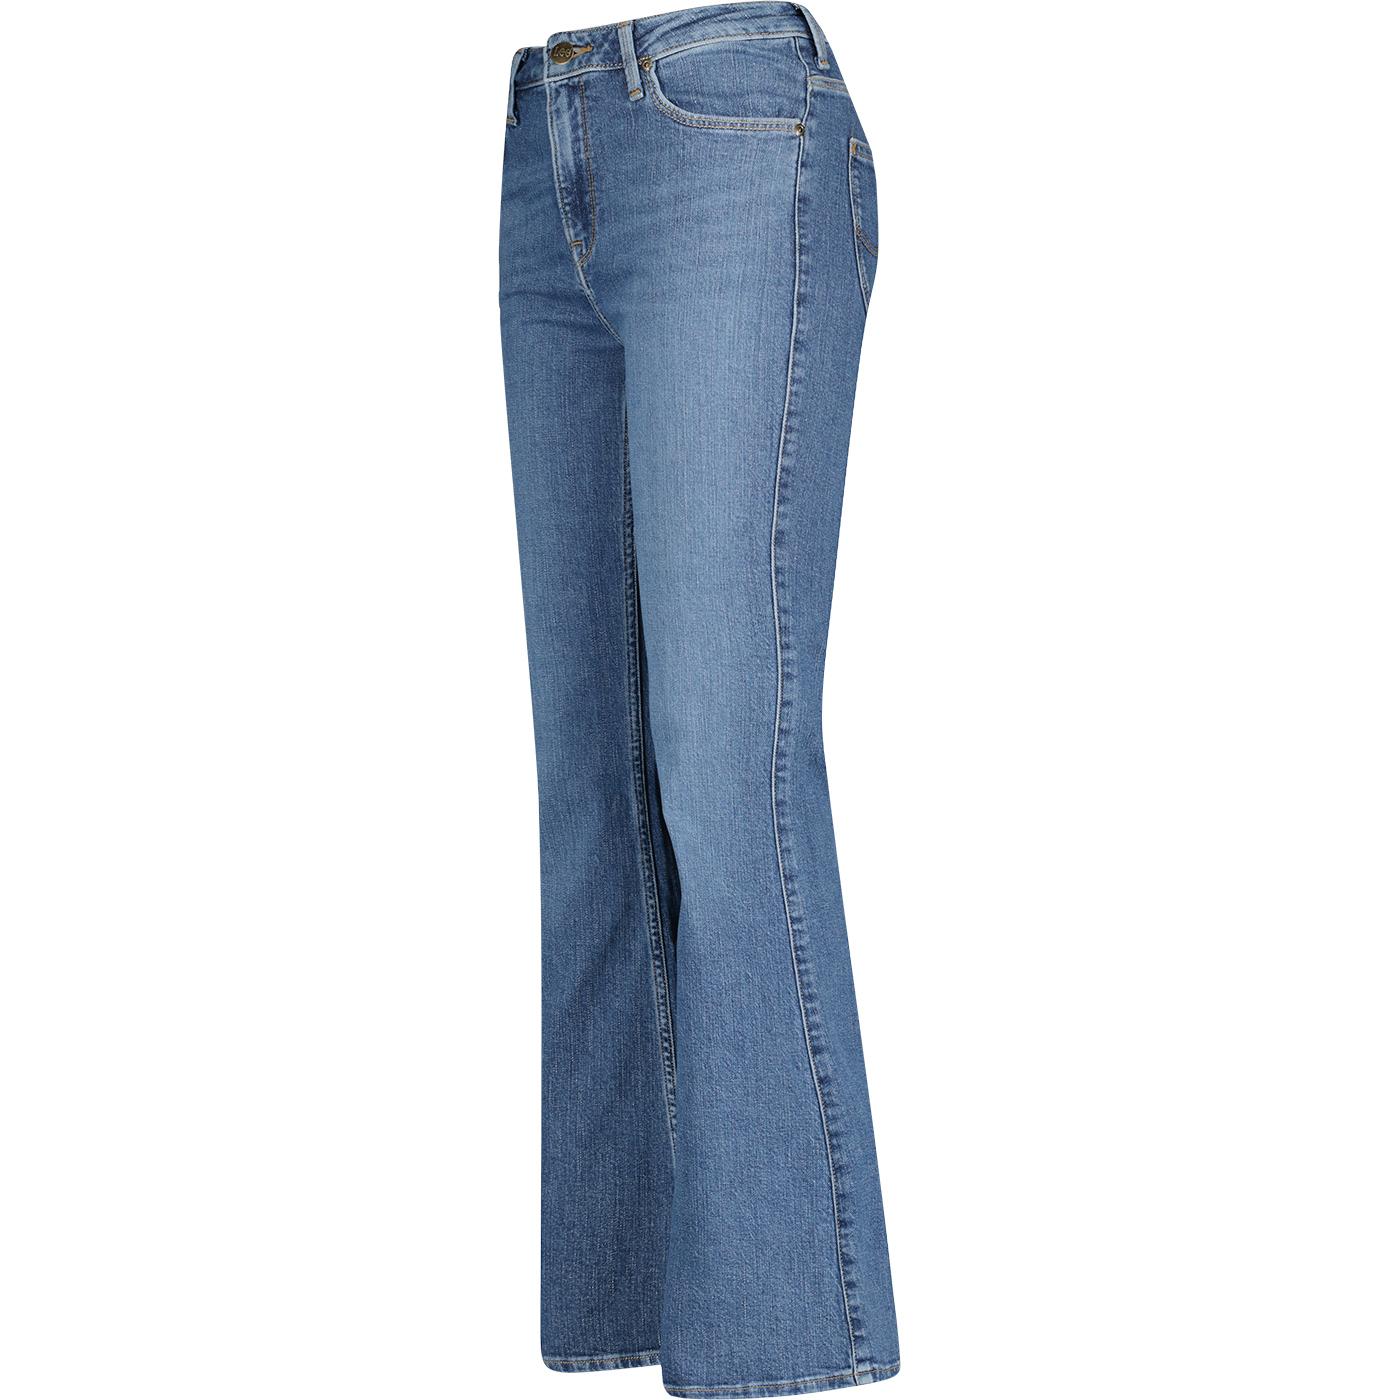 Breese Lee Bootcut Retro 70s Flared Jeans in Indigo